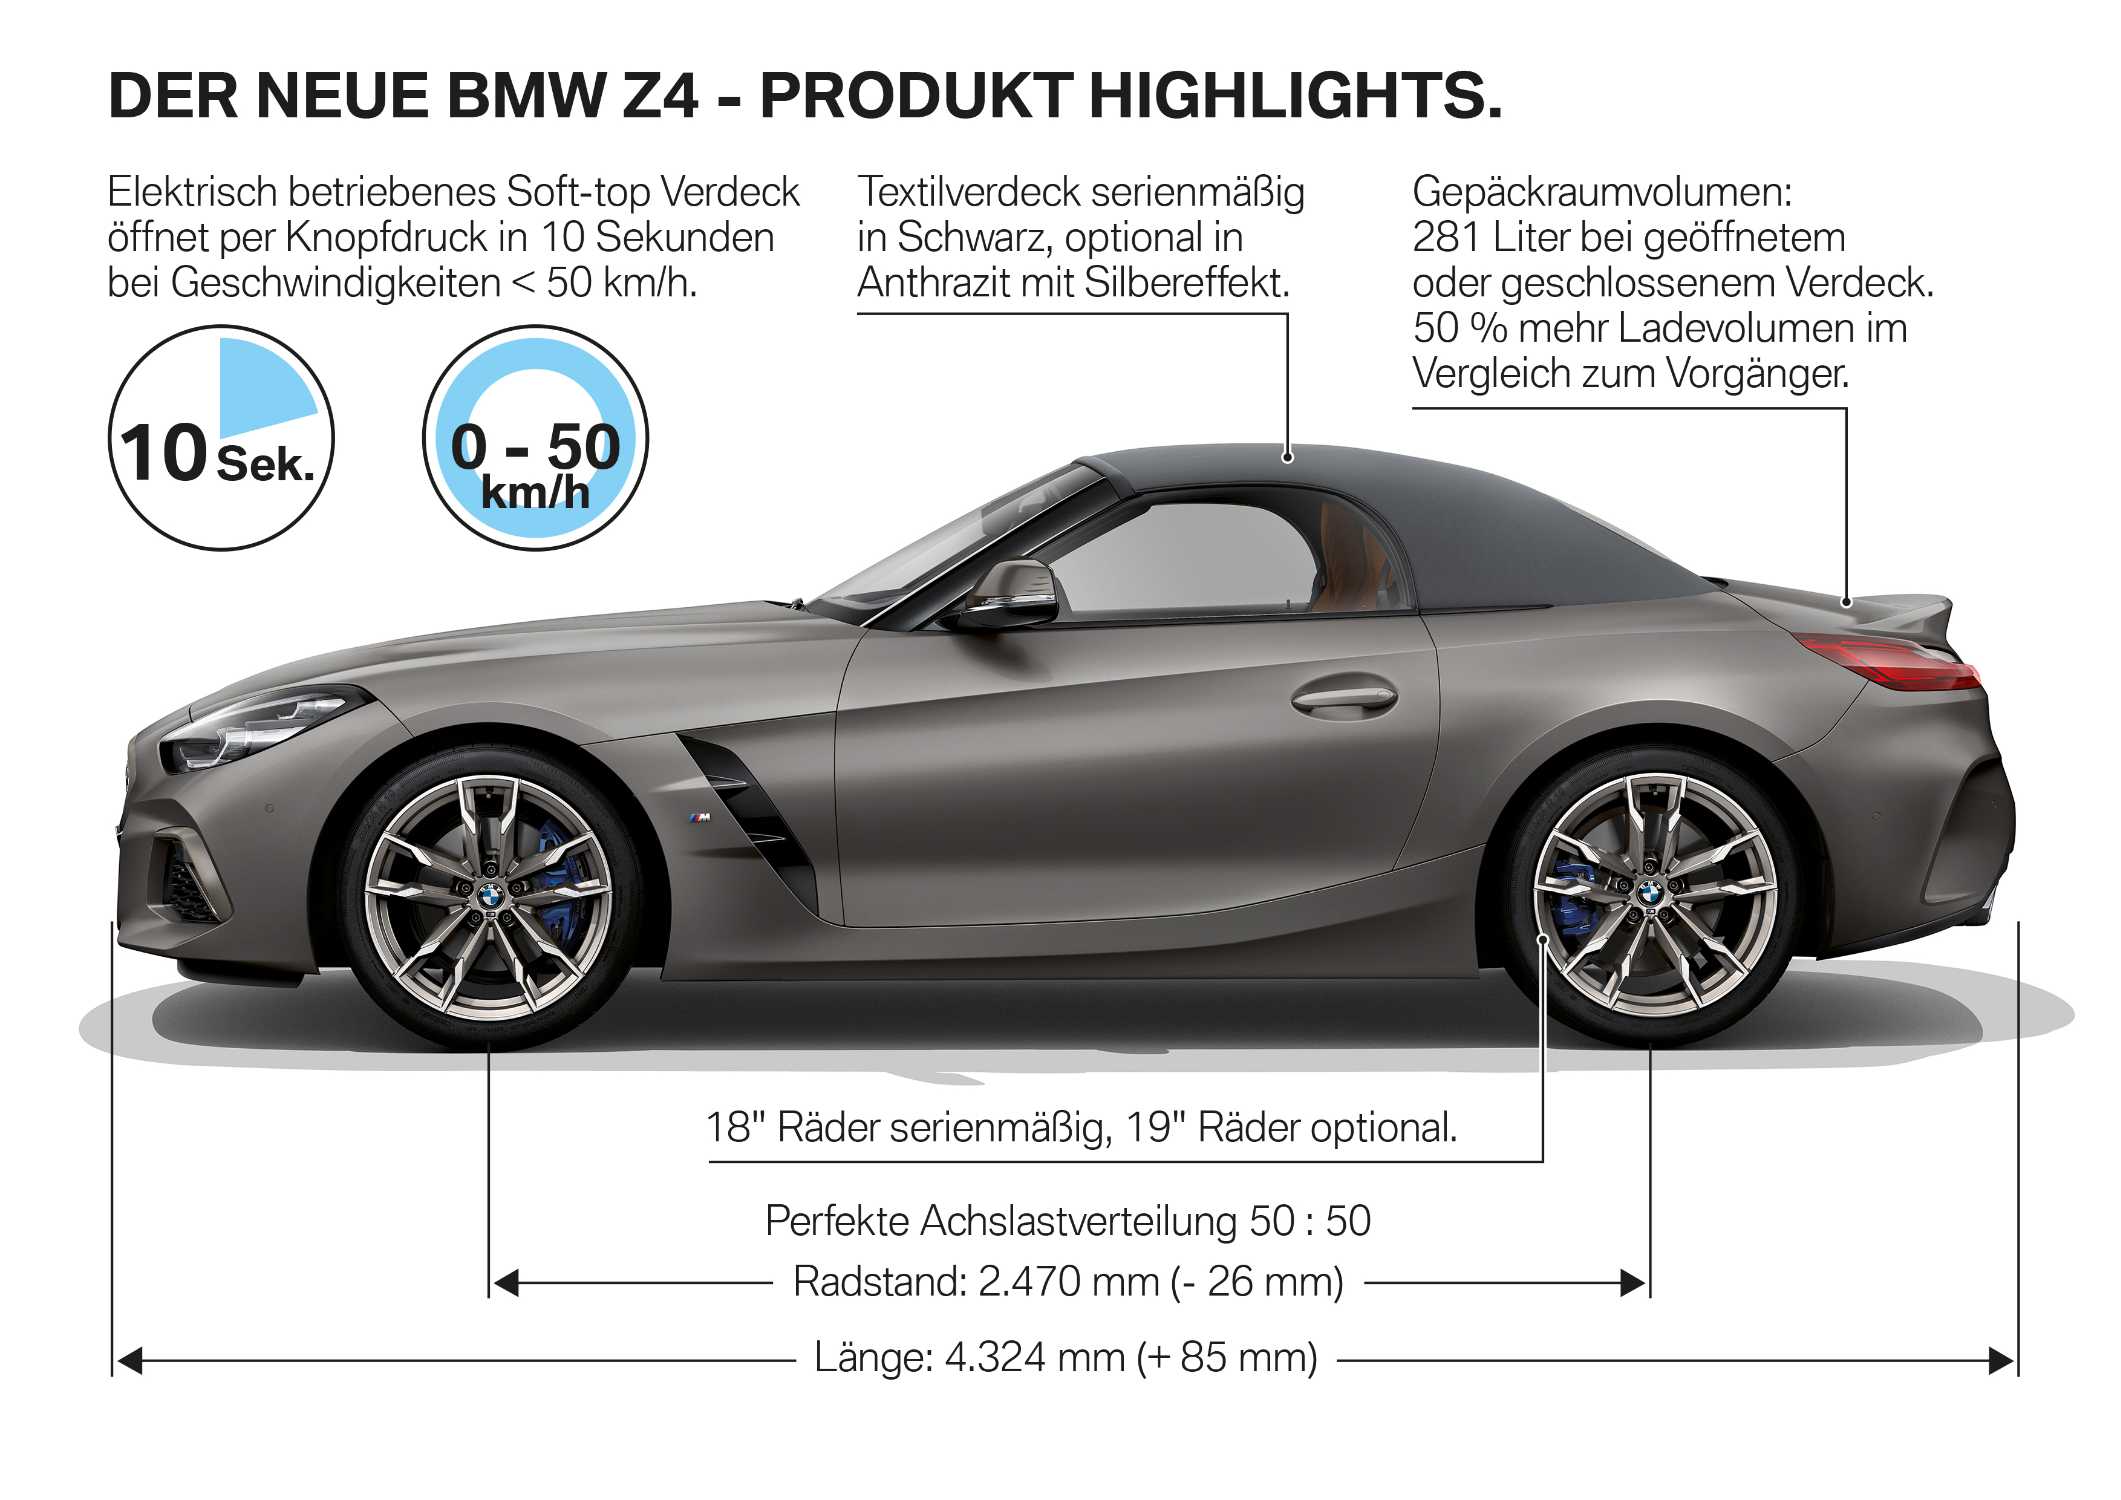 P90321123-the-new-bmw-z4-product-highlights-09-2018-2121px.jpg